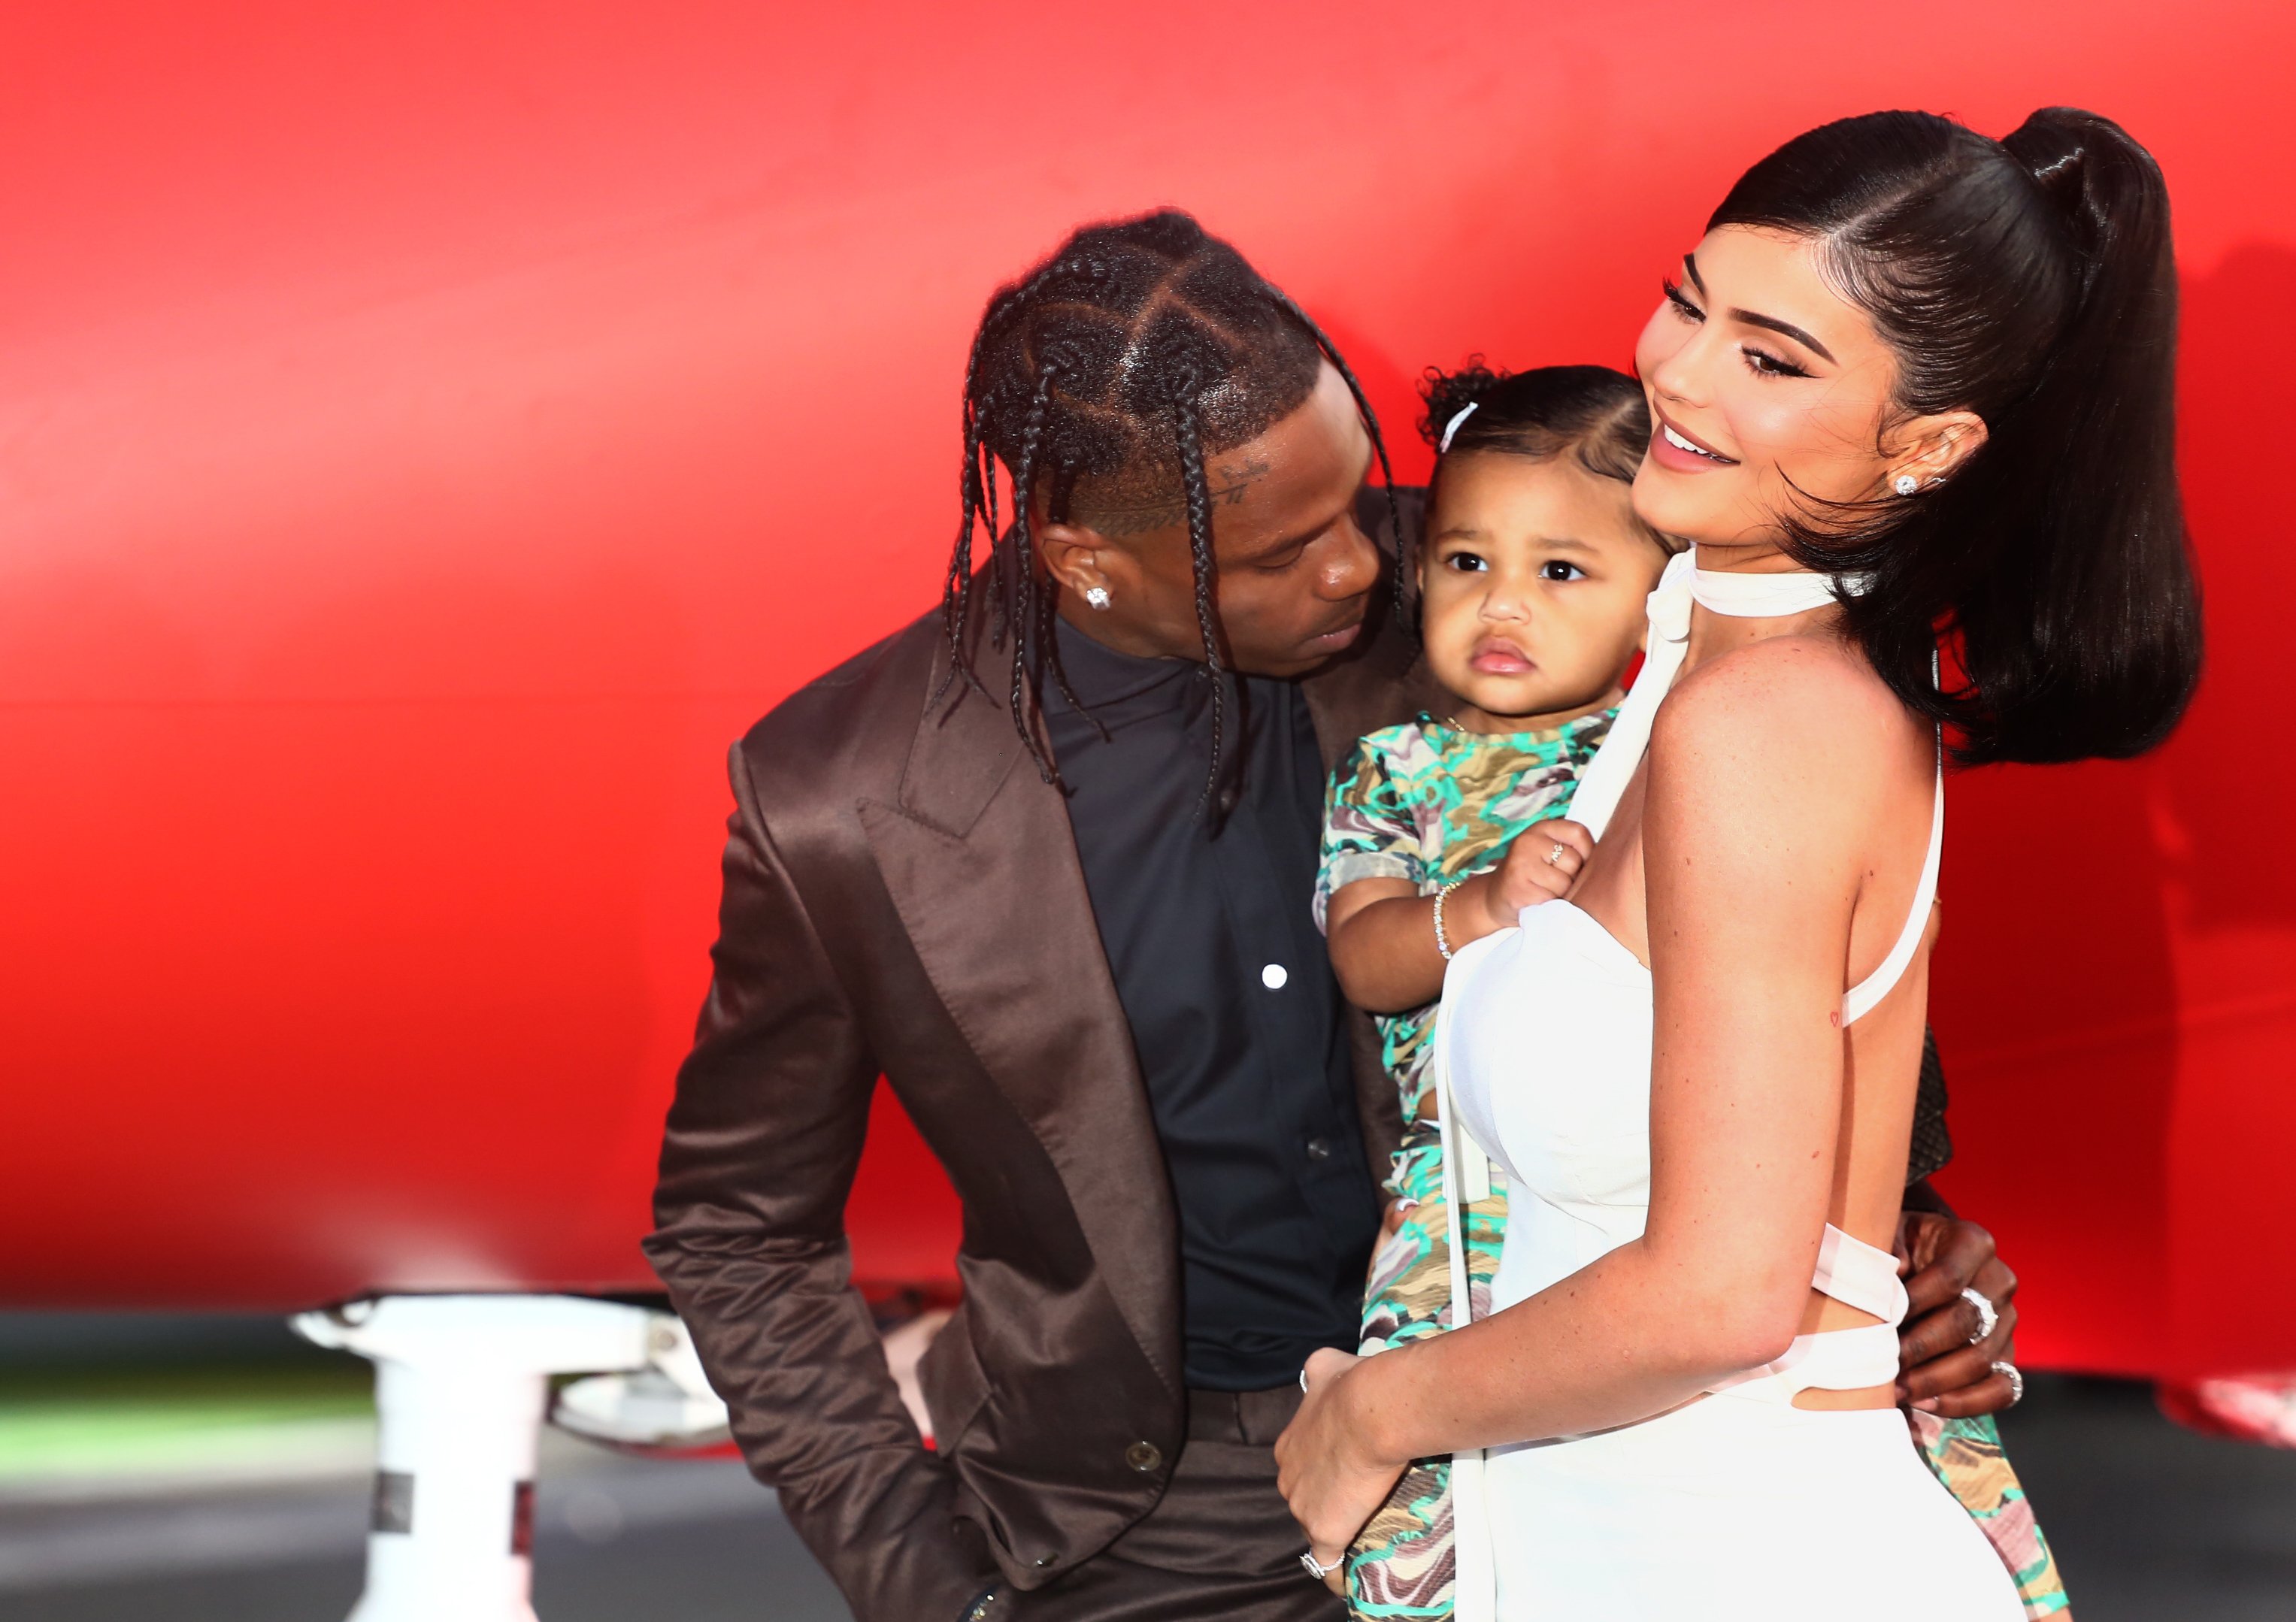 Travis Scott and Kylie Jenner attend the Travis Scott: "Look Mom I Can Fly" Los Angeles Premiere at The Barker Hanger on August 27, 2019, in Santa Monica, California. | Source: Getty Images.